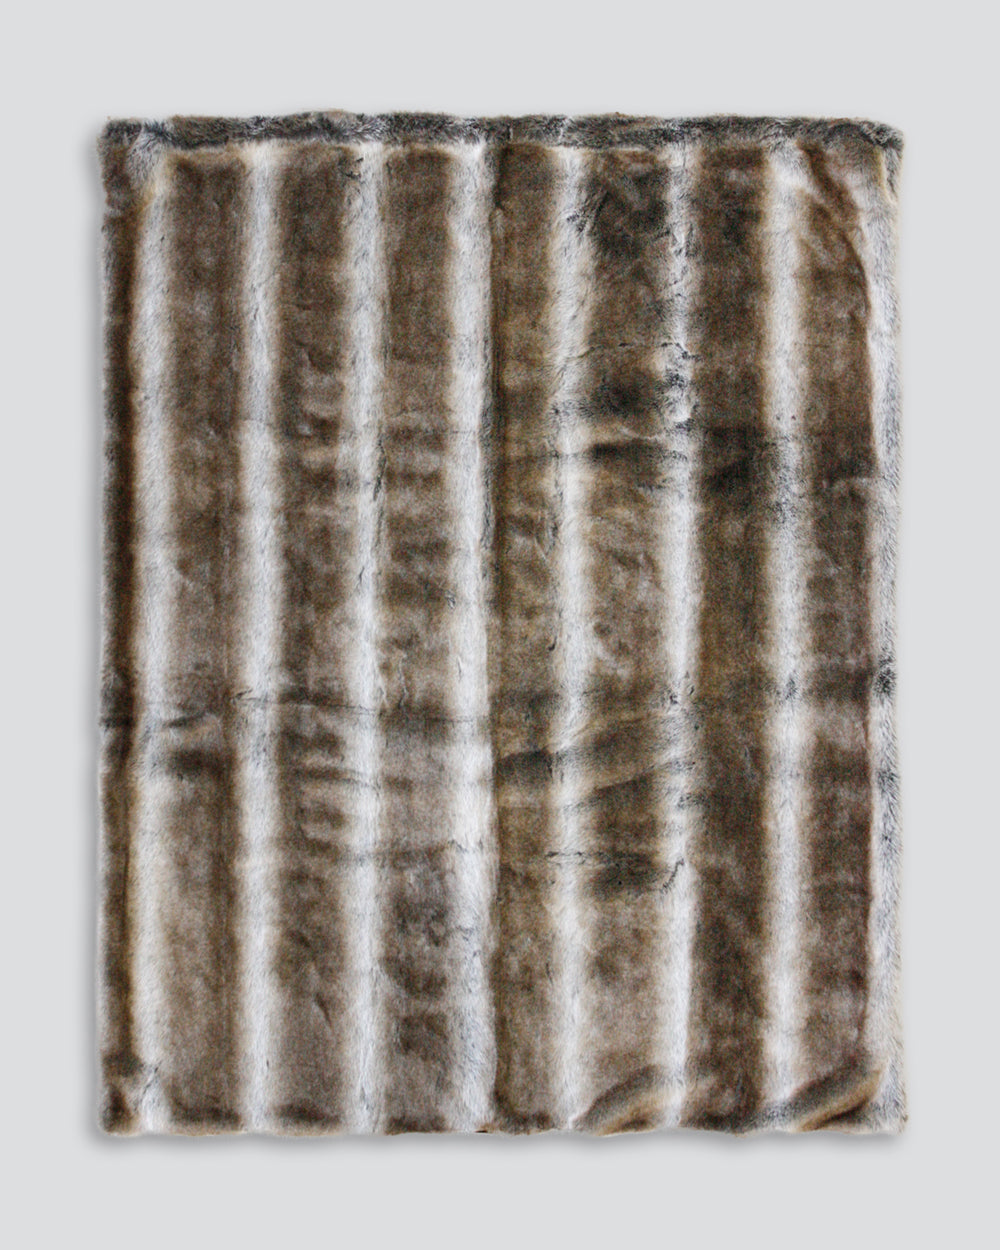 Heirloom Striped Elk Throw Rug Blanket in Faux Fur is available from Make Your House A Home Premium Stockist. Furniture Store Bendigo, Victoria. Australia Wide Delivery.